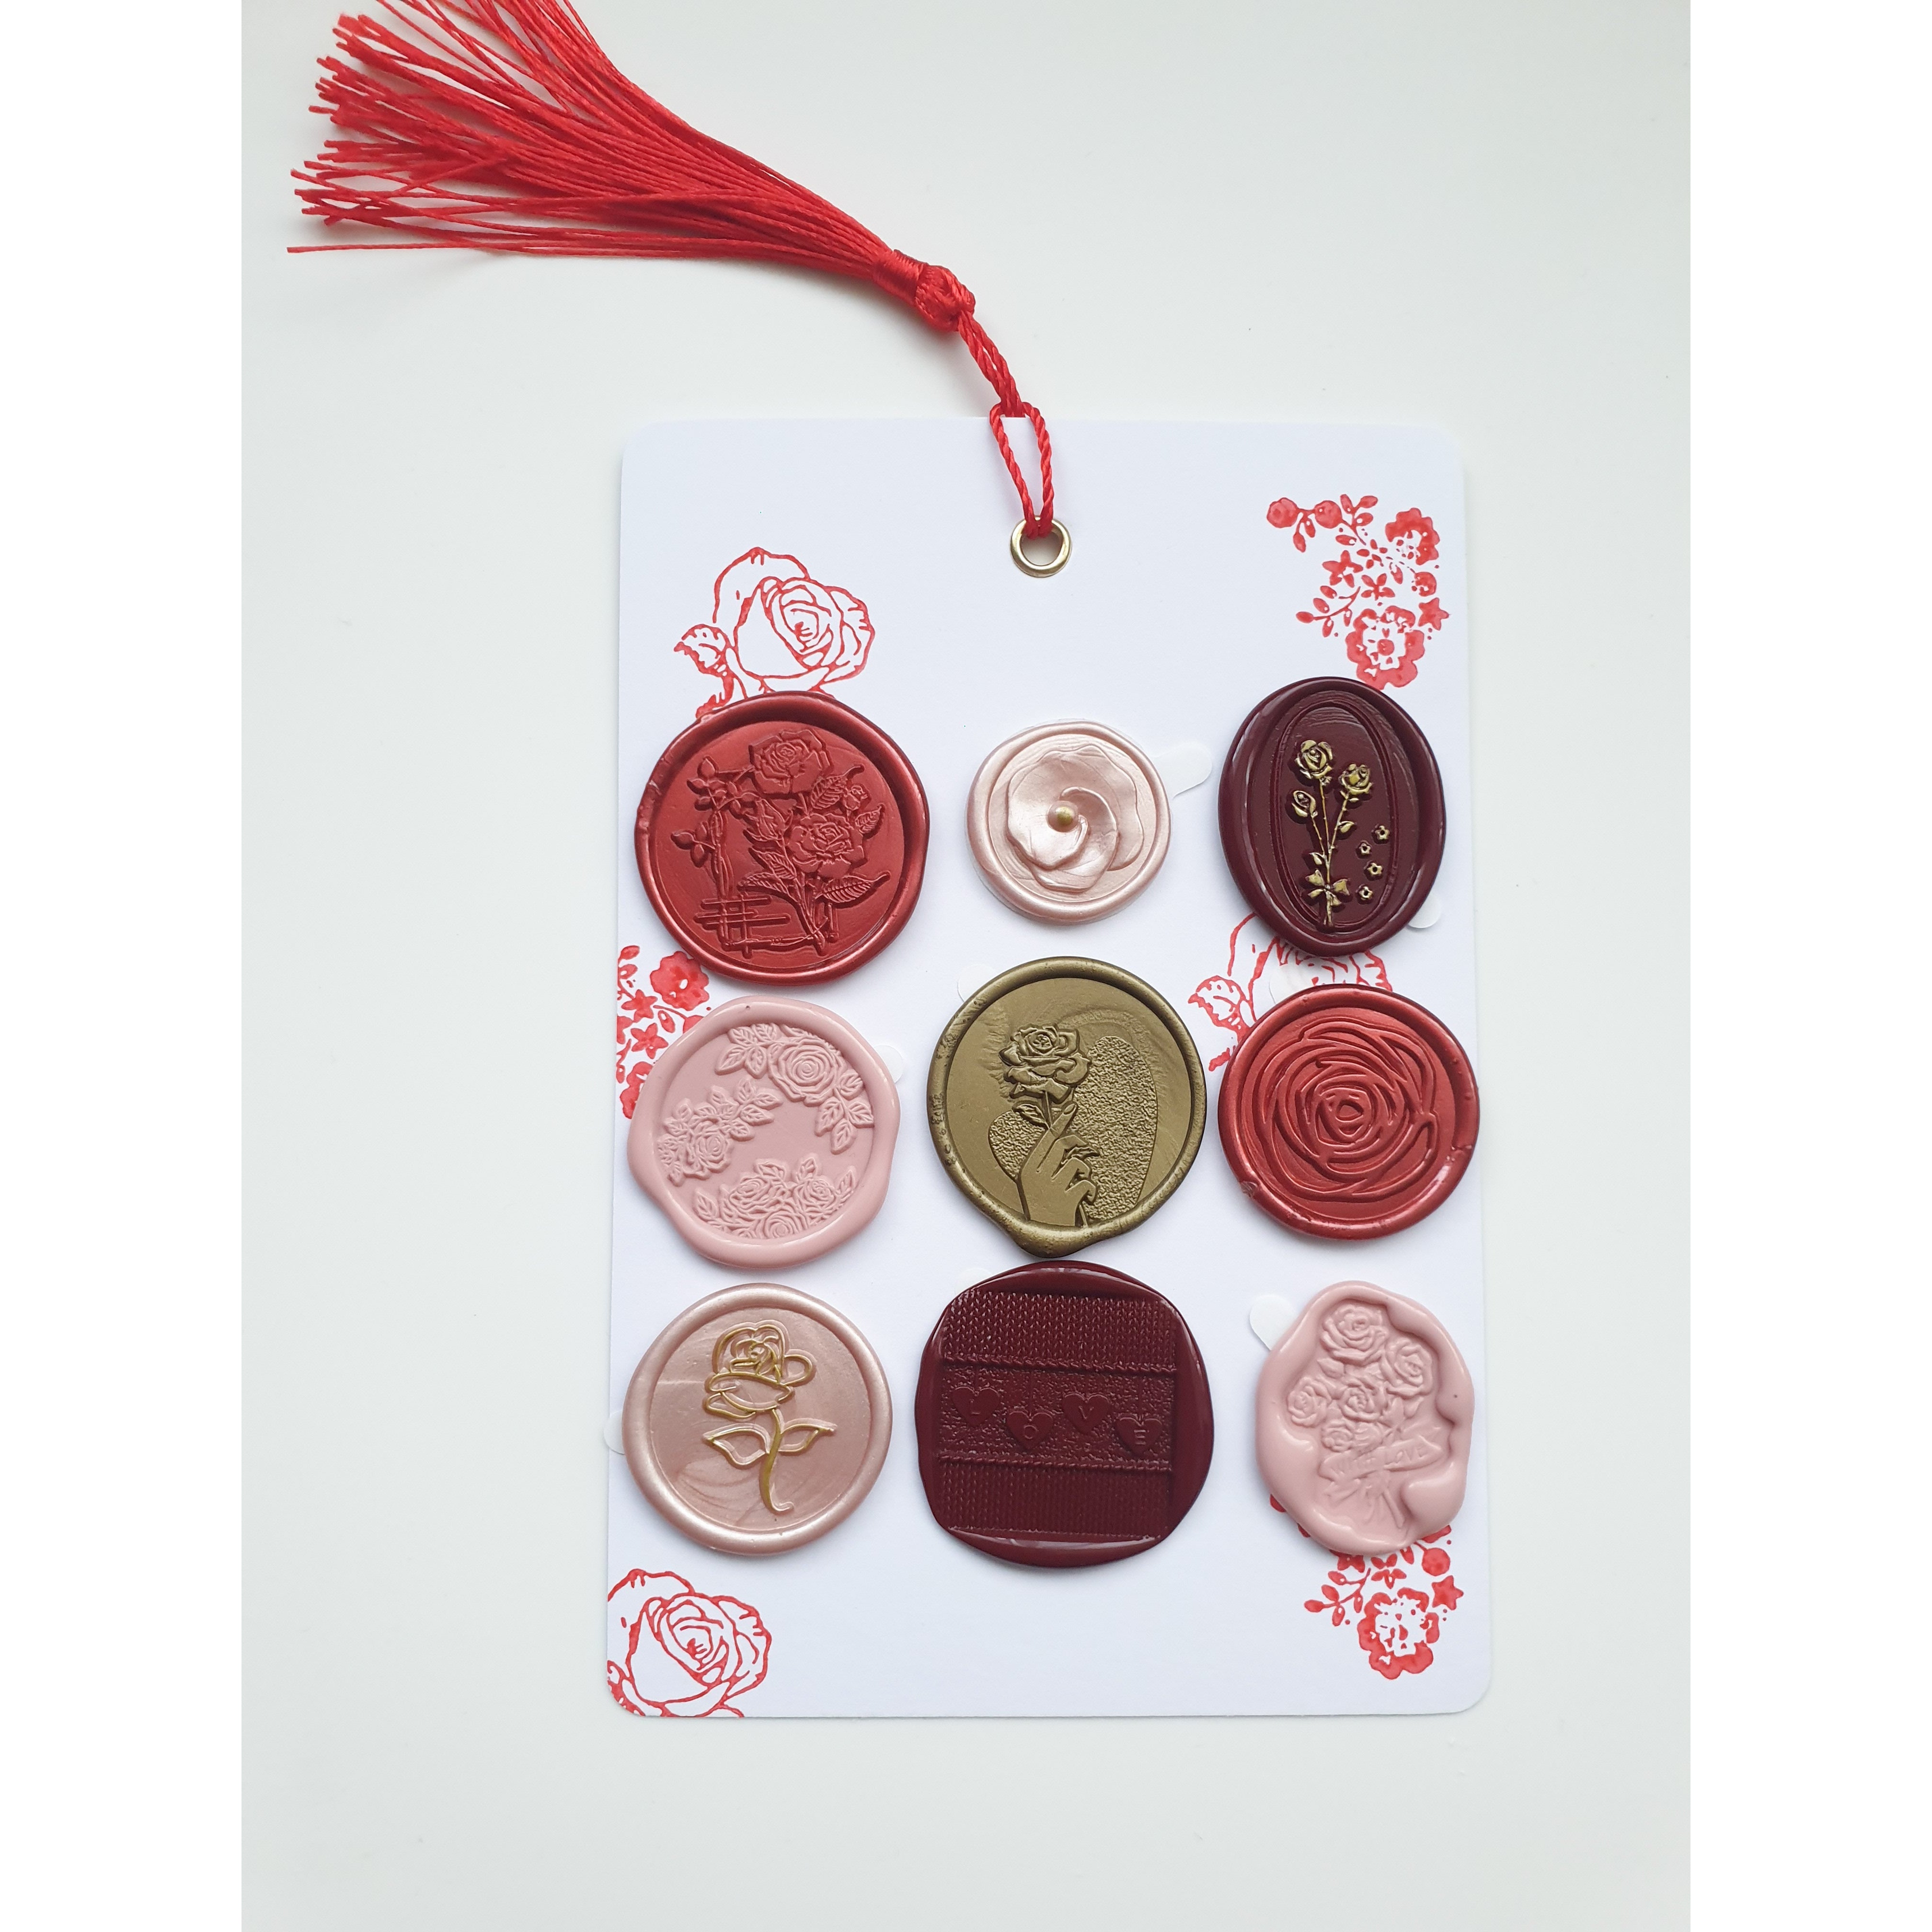 Ready Made Wax Seals Stickers - Rose Self-Adhesive Wax Seal Stickers - Style 07